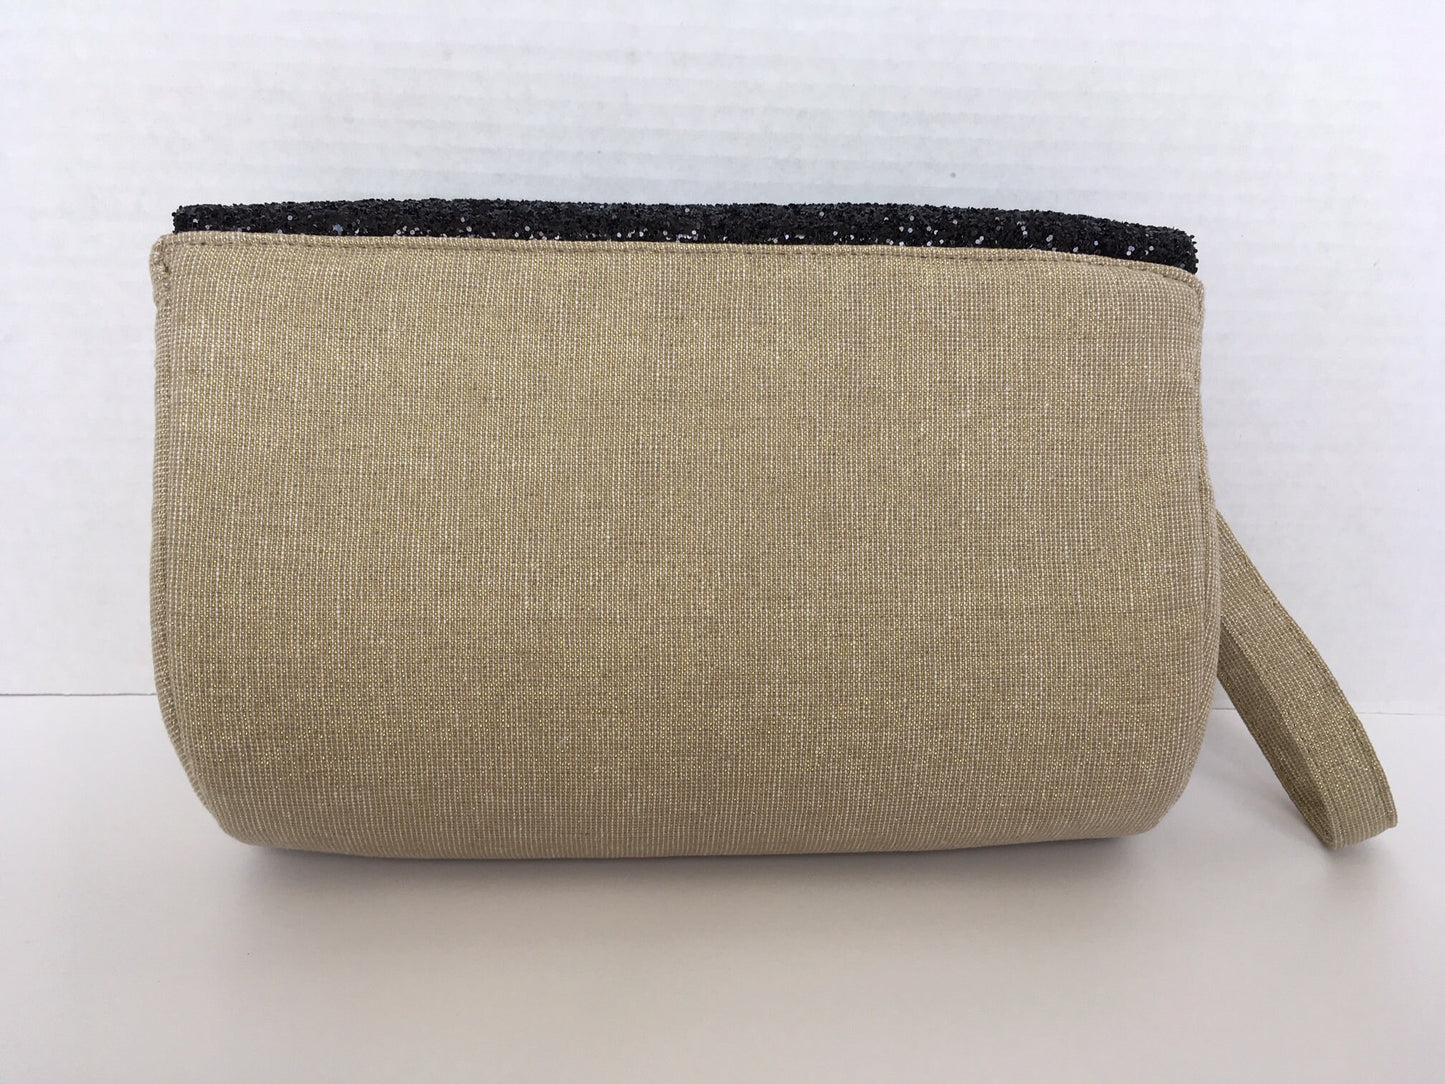 Black Glitter and Gold Metallic Linen Clutch Bag with removable wrist strap